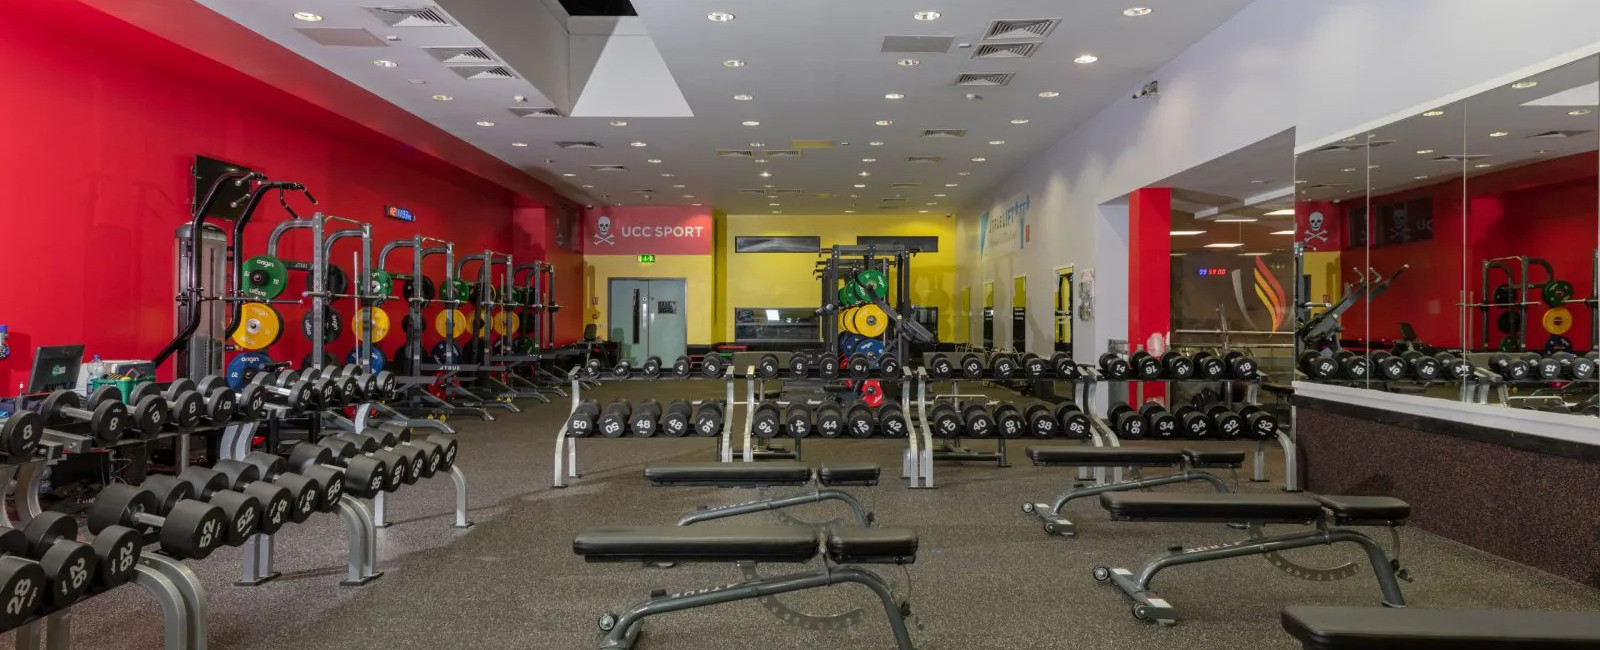 weights and benches in a commercial gym